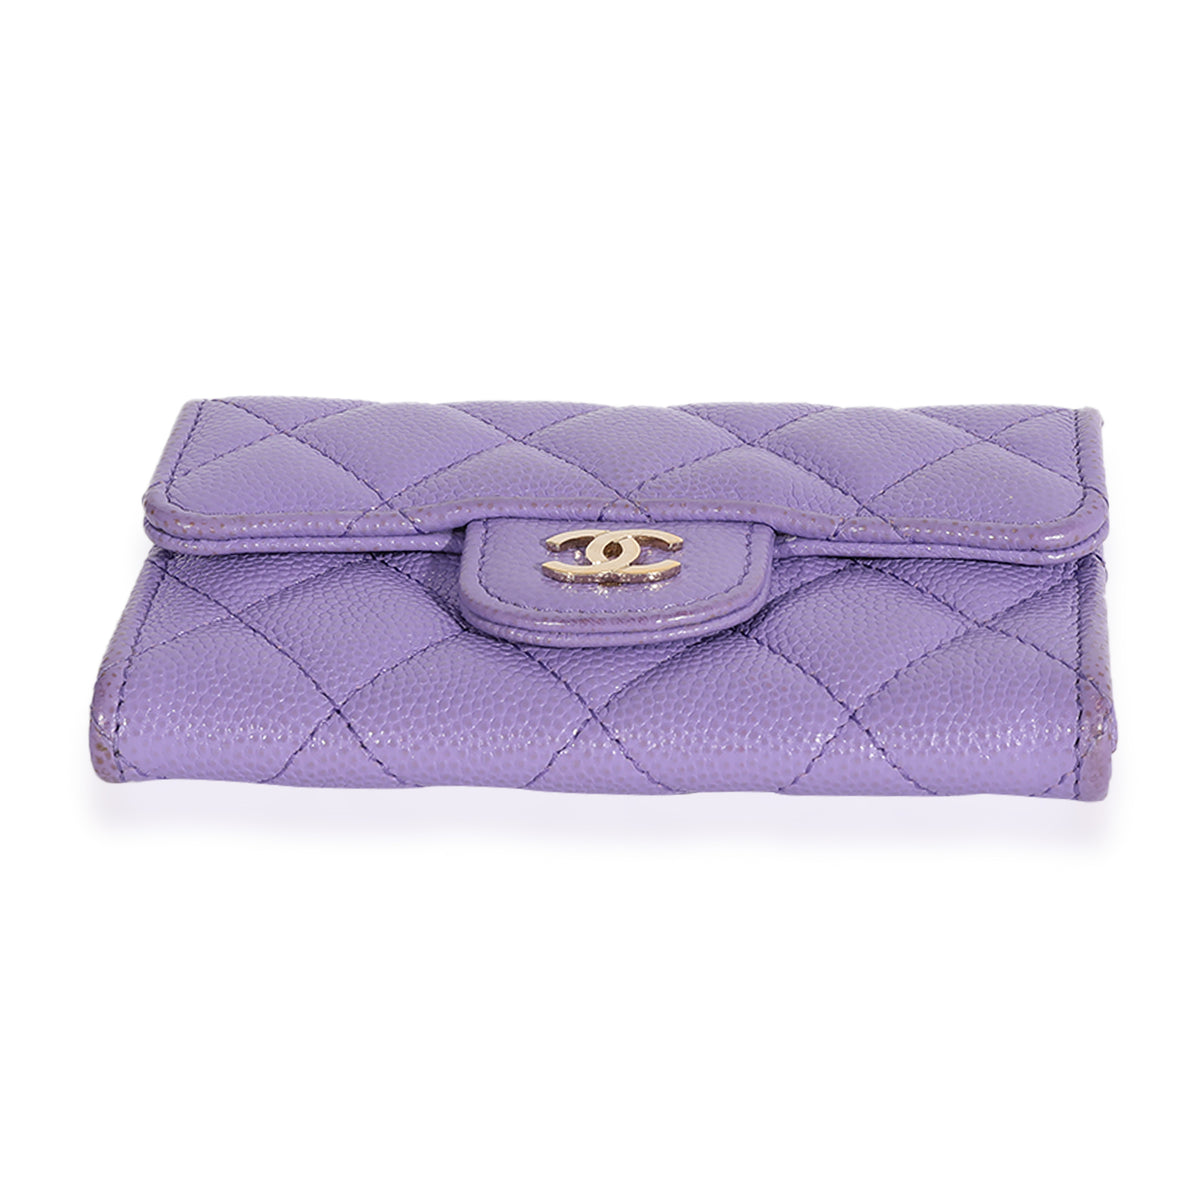 Chanel Trifold Compact Wallet in Iridescent Purple Calfskin LGHW  Brands  Lover